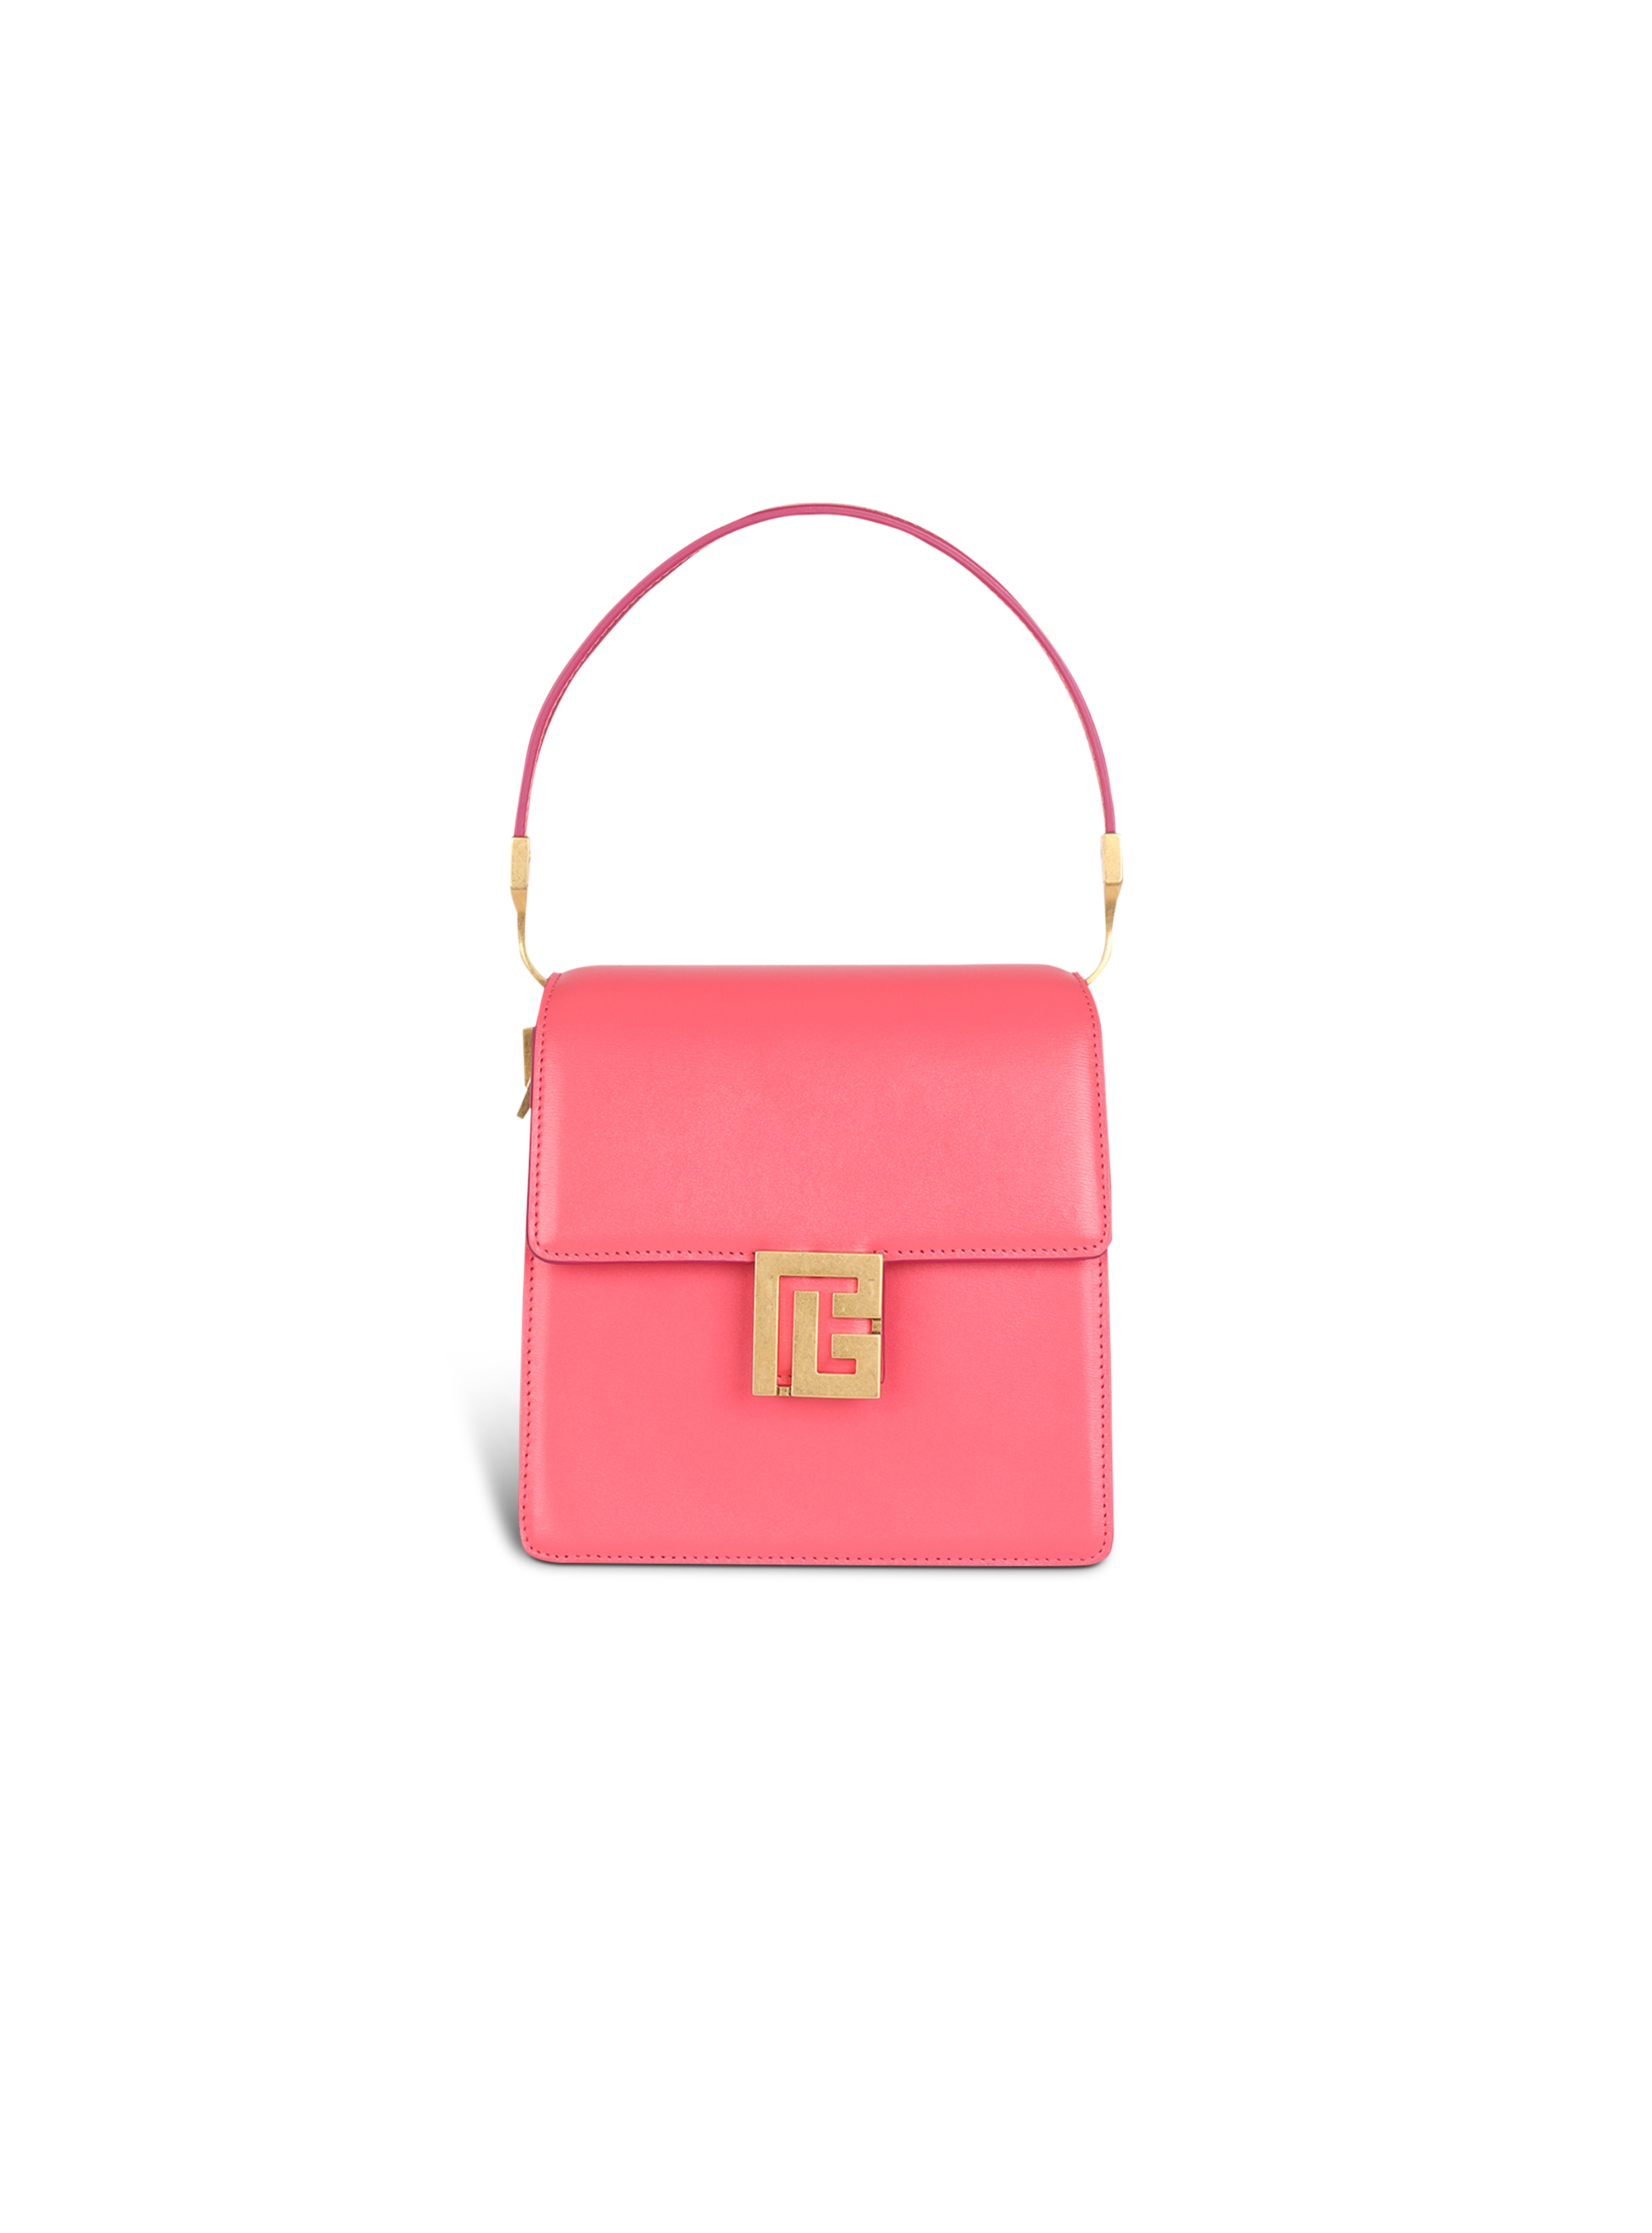 Smooth leather Ely bag, pink